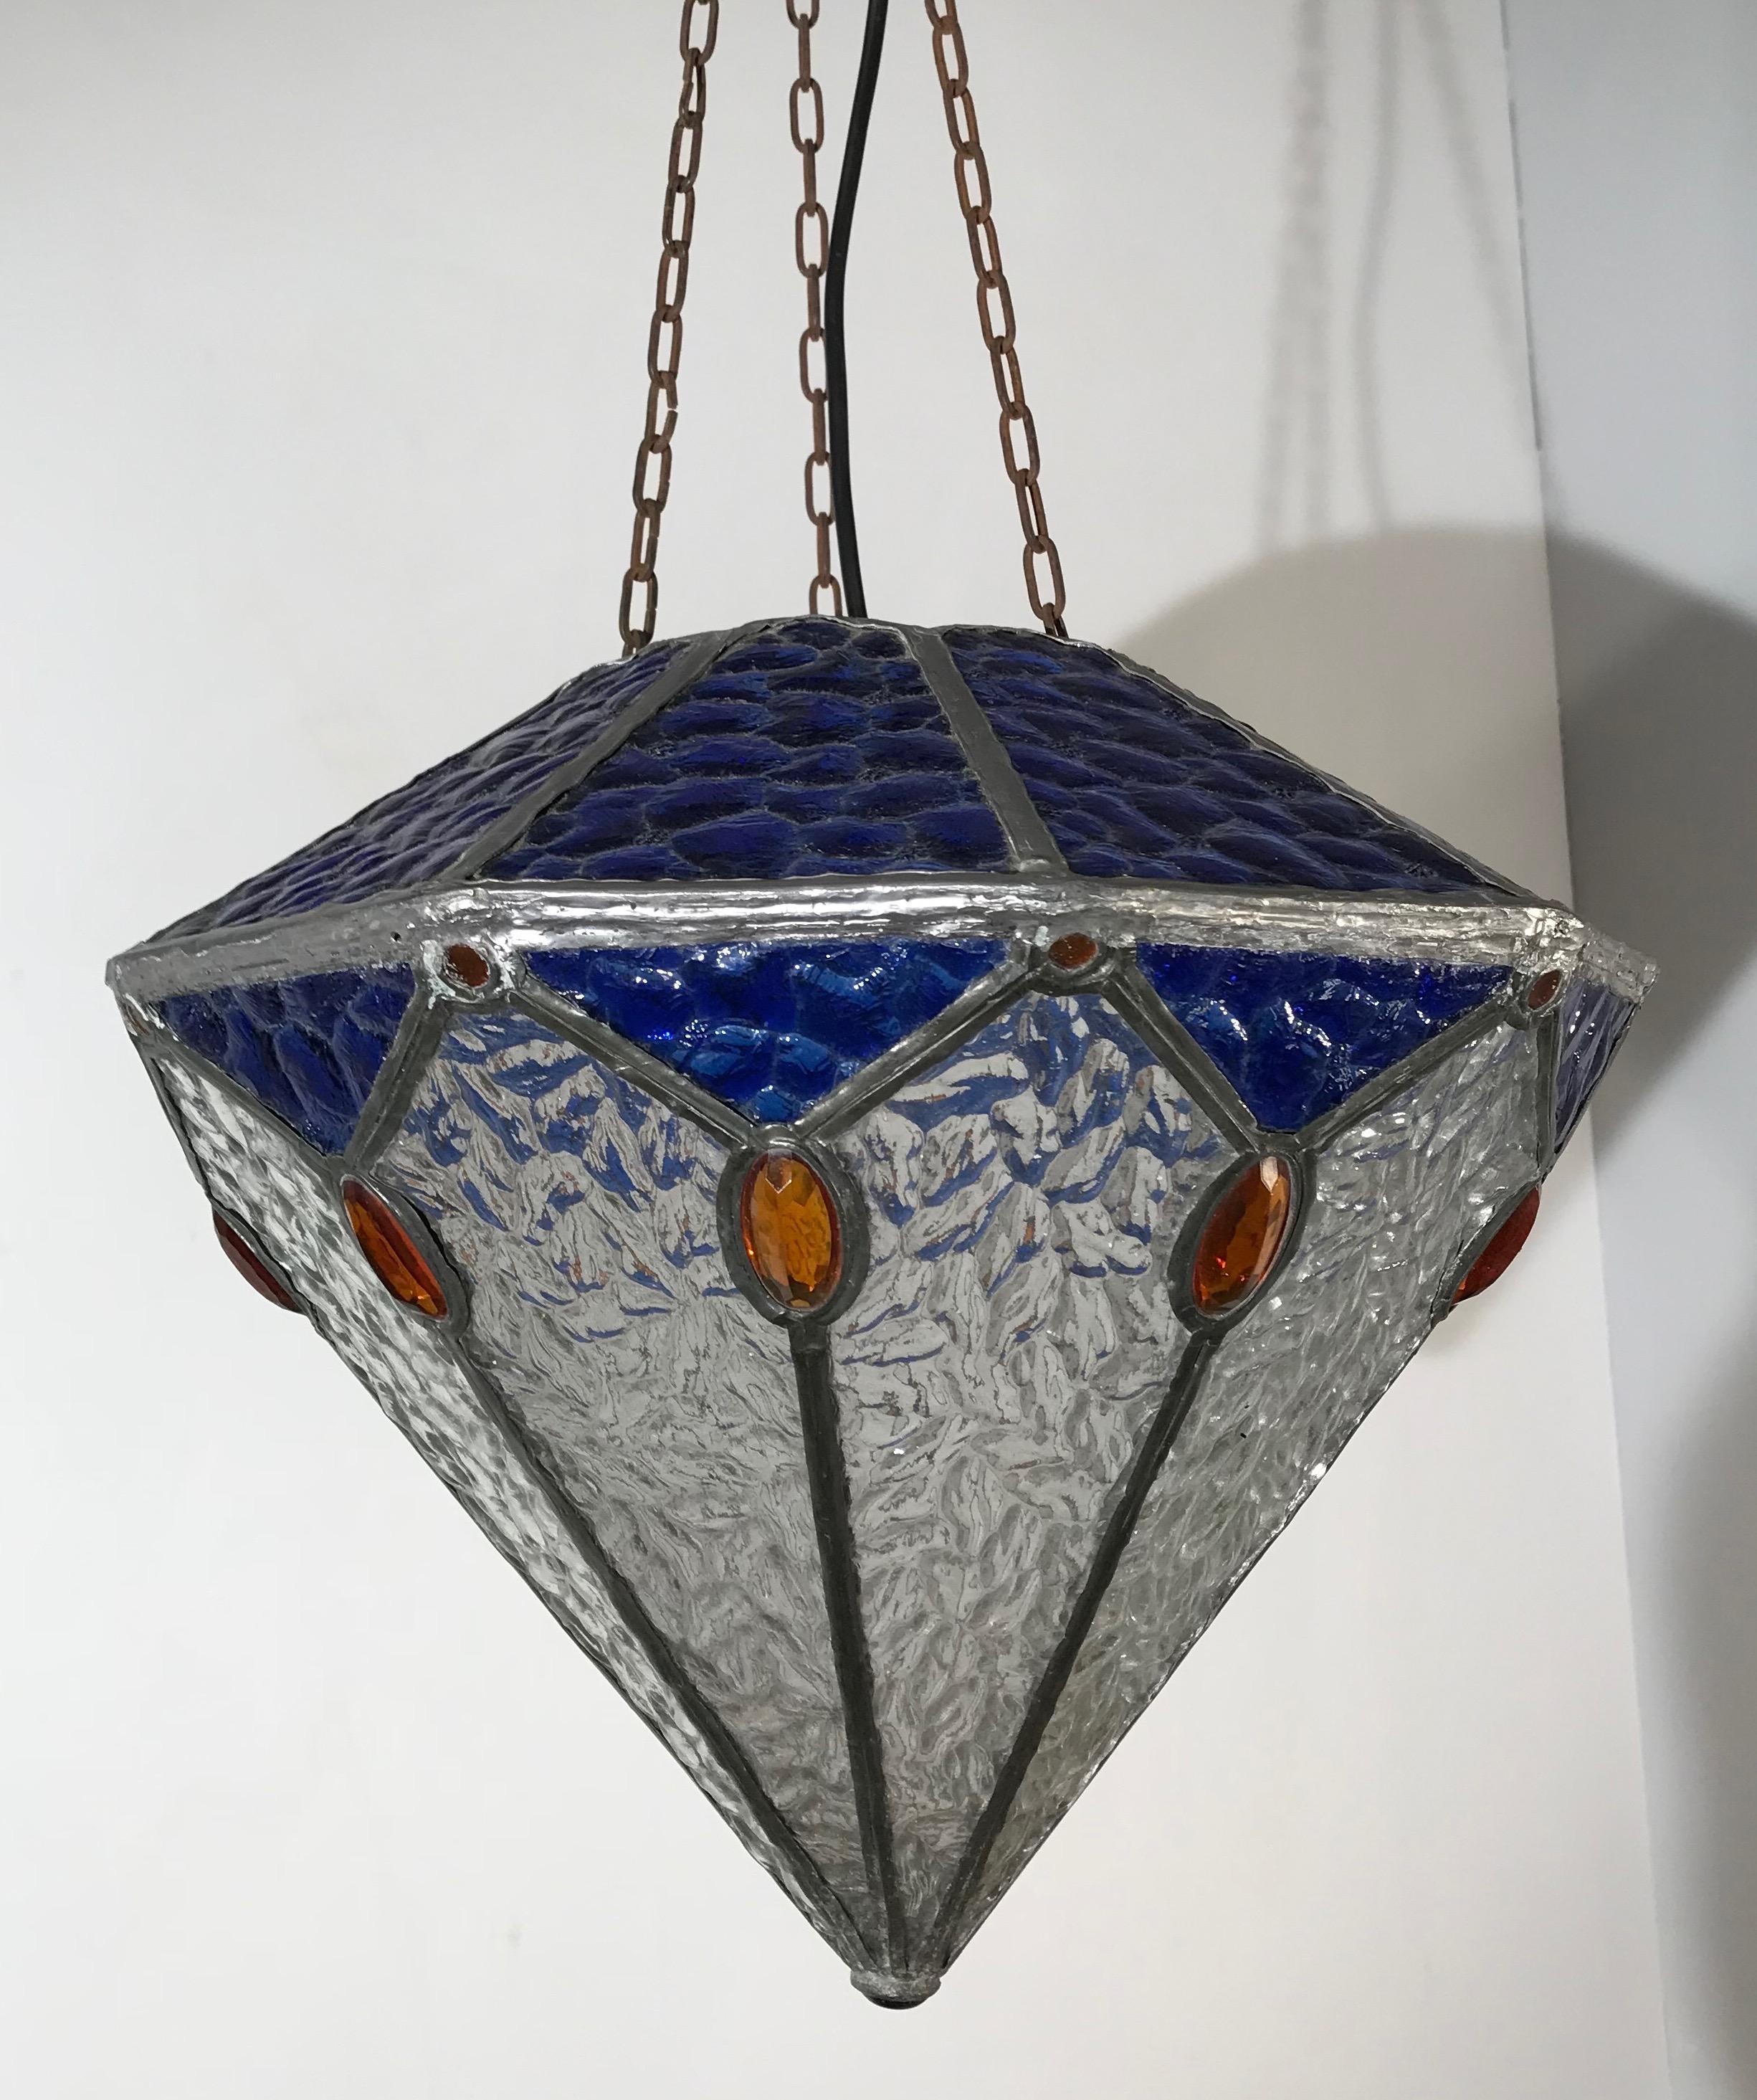 20th Century Handcrafted Stain Leaded Art Deco Glass Pendant Diamant Design & Great Colors